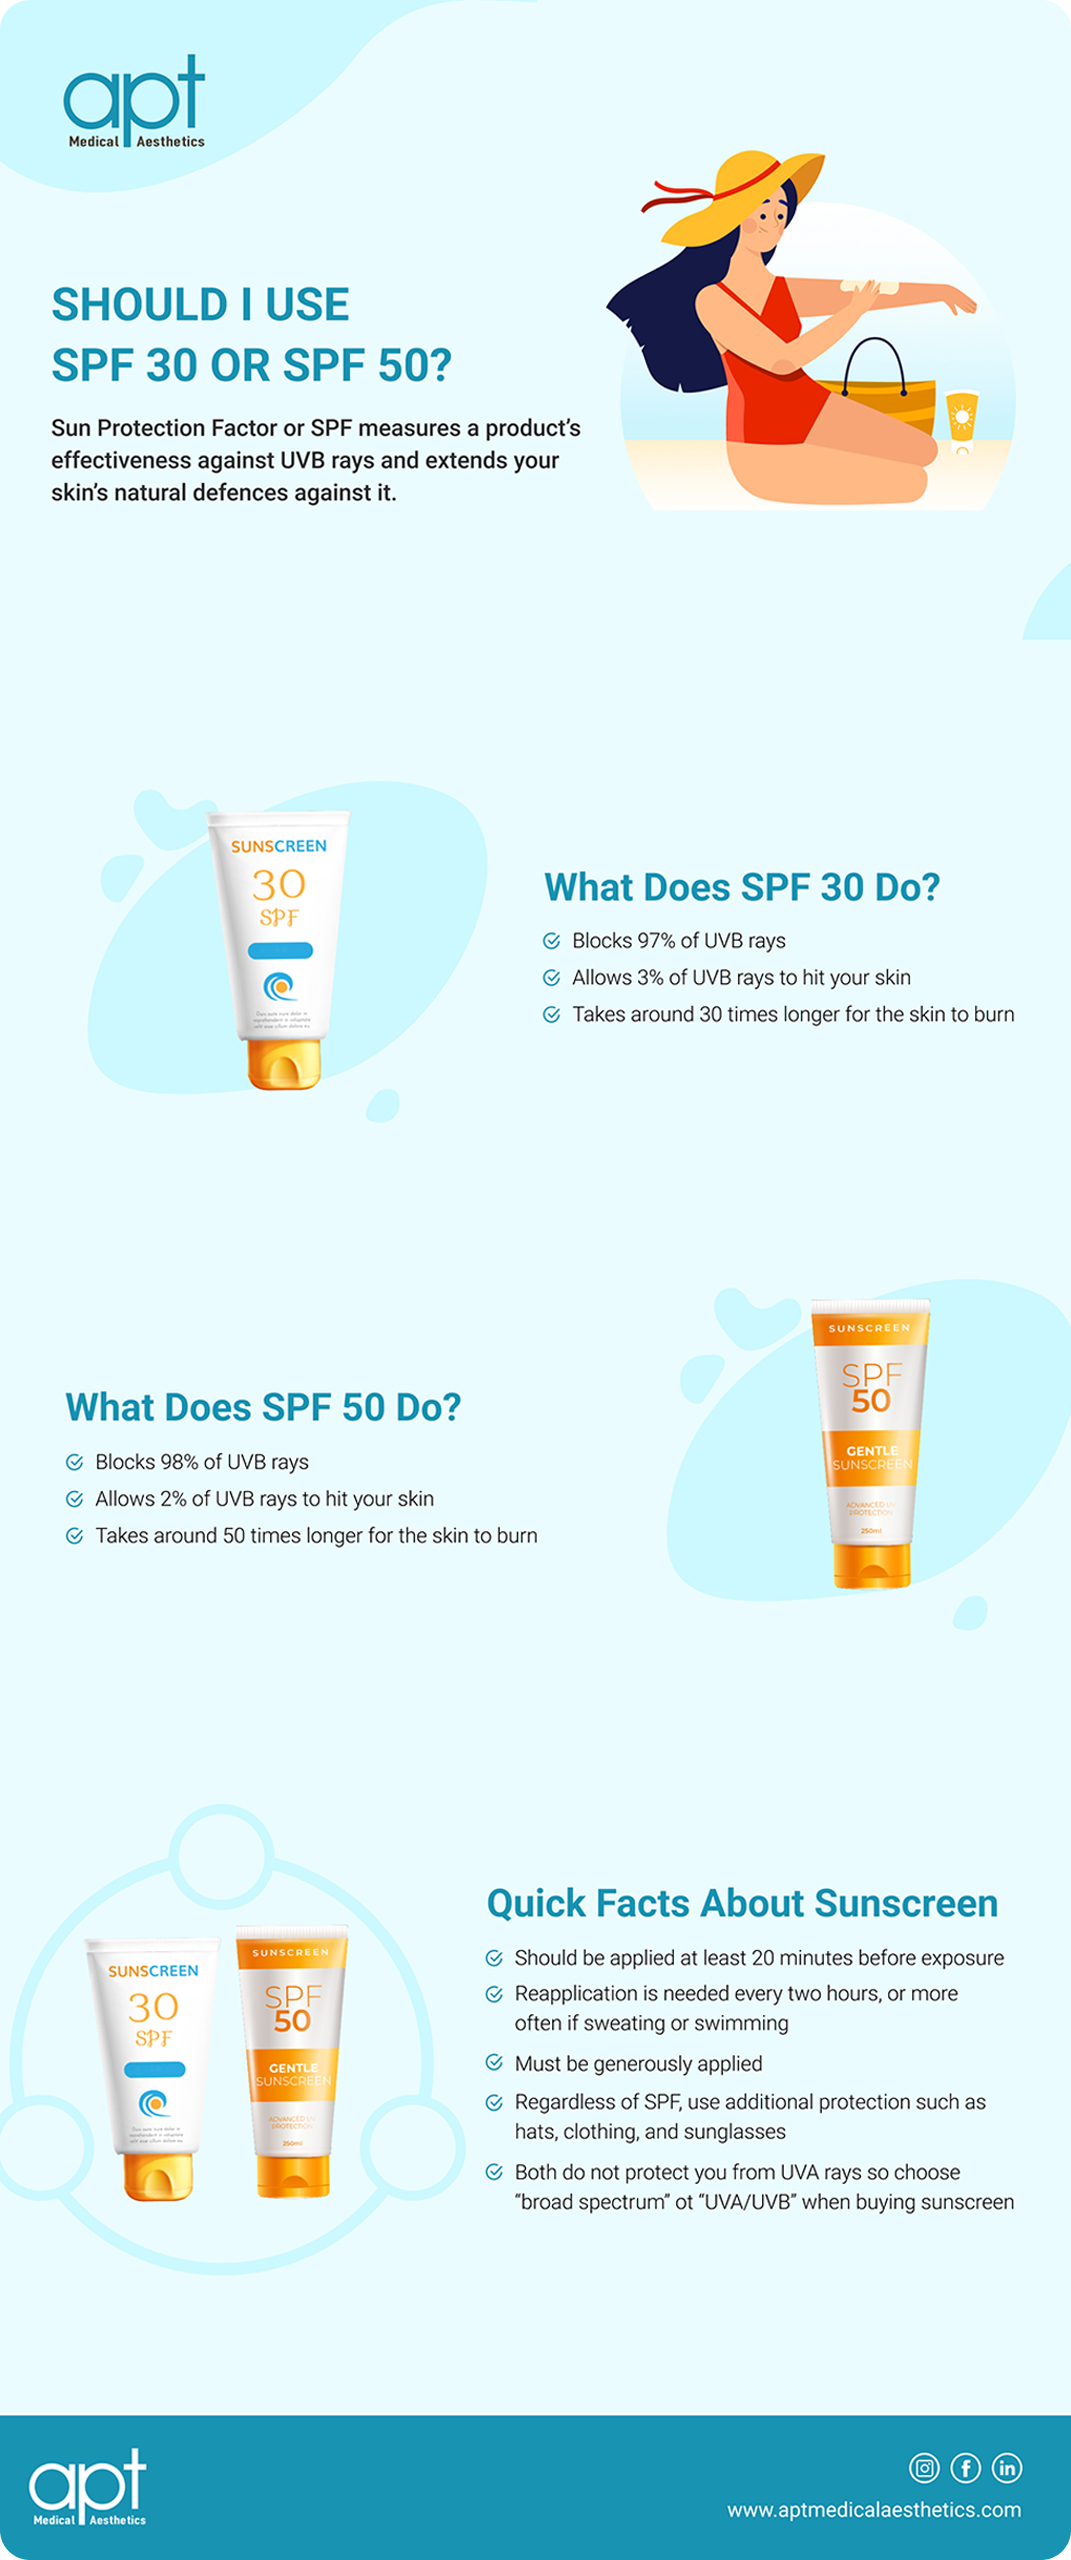 Is SPF 15 Enough to Give Your Skin Sun Protection?